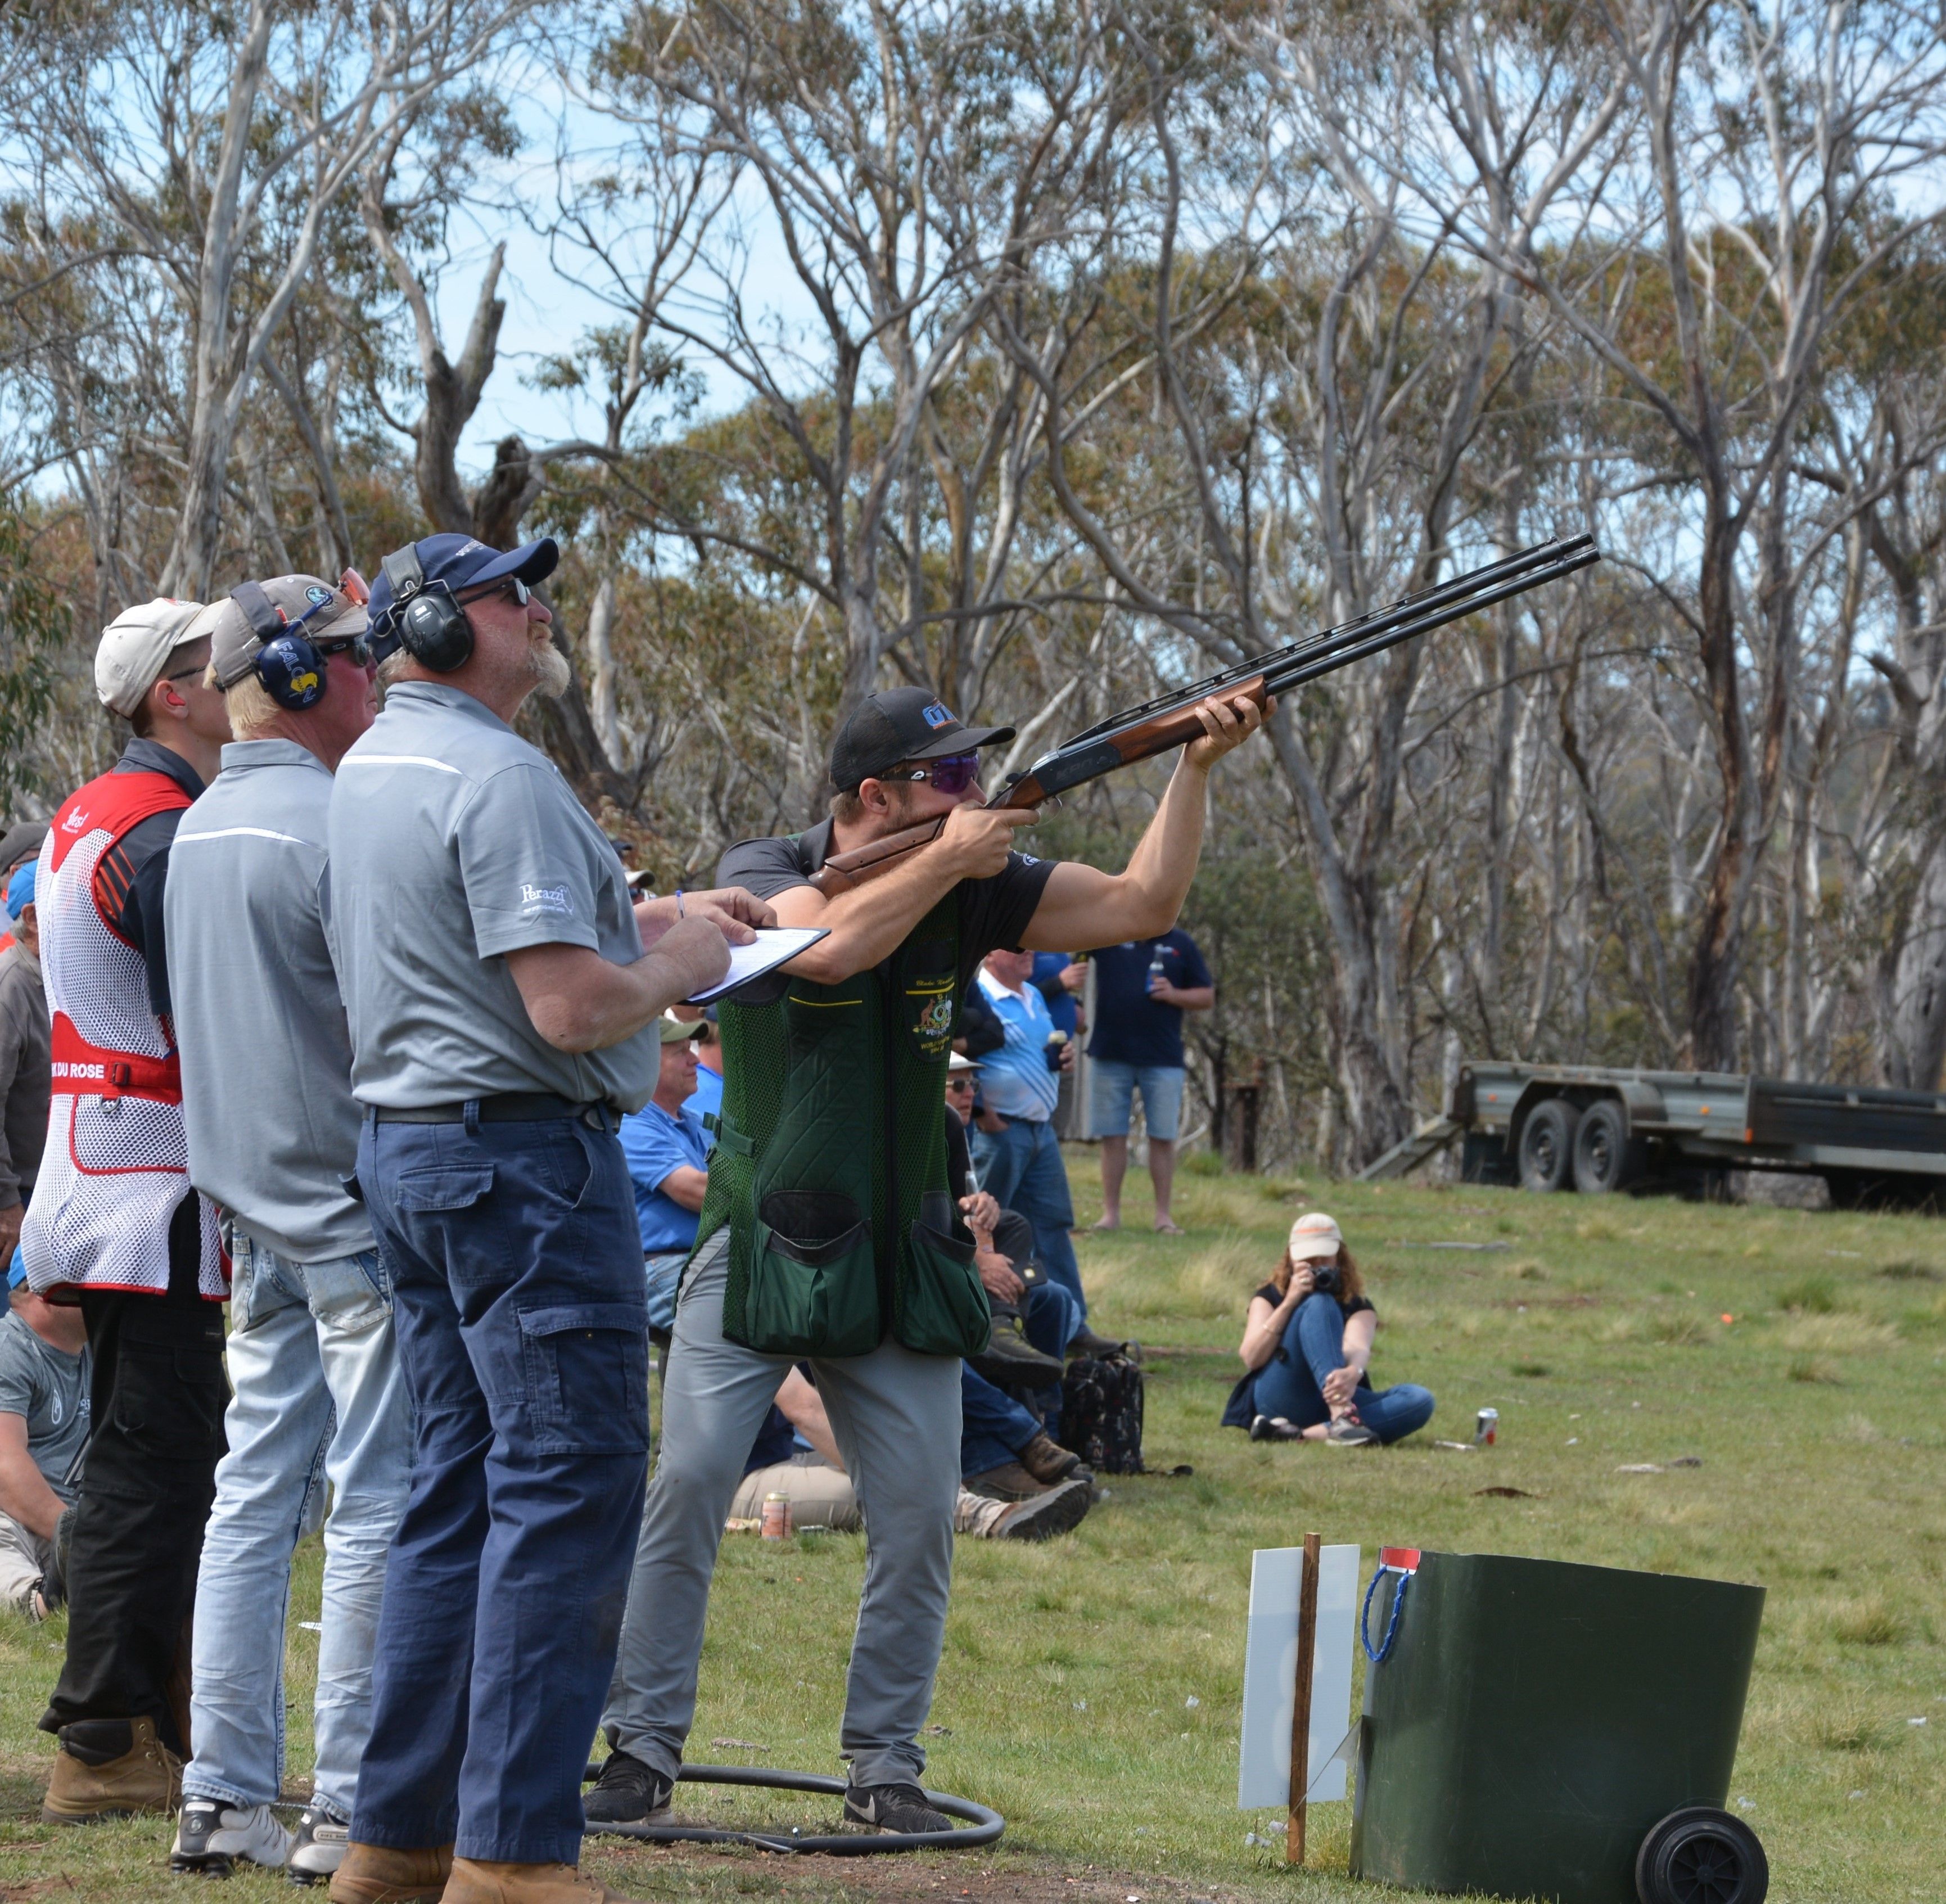 National shooting event comes to Cooma, braves wild Snowy weather